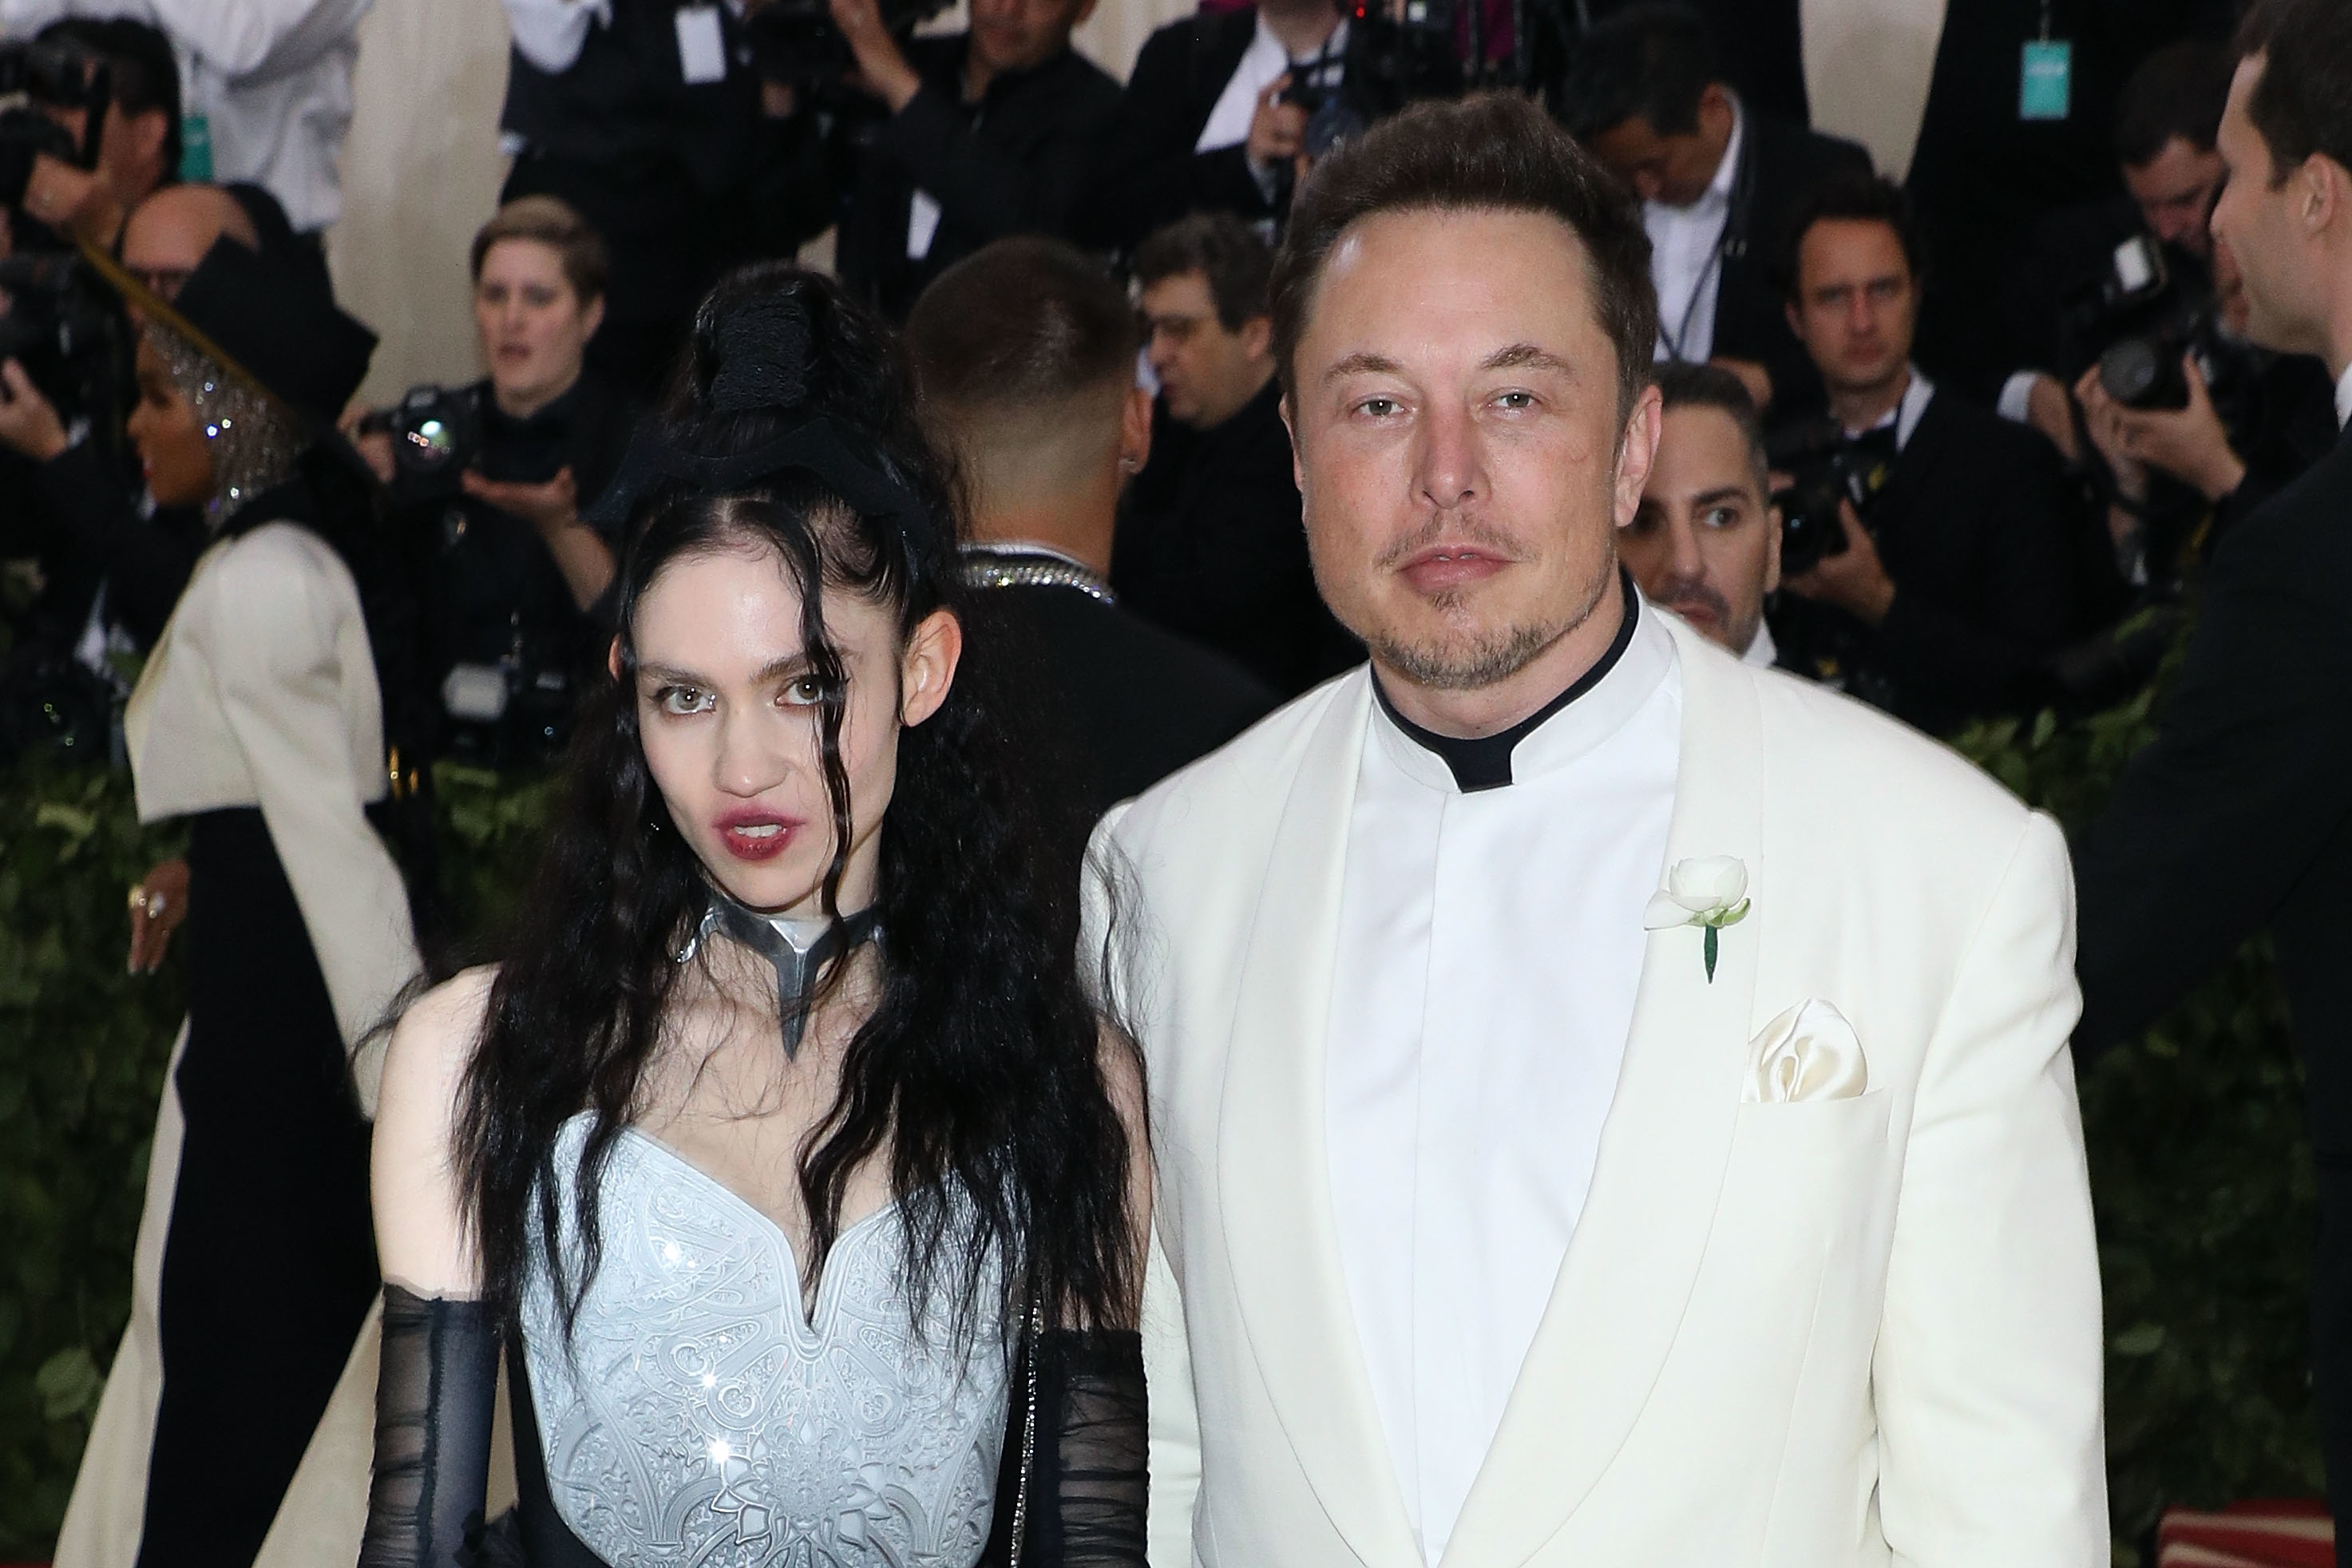 Closeup of Grimes and Elon Musk at a red carpet event